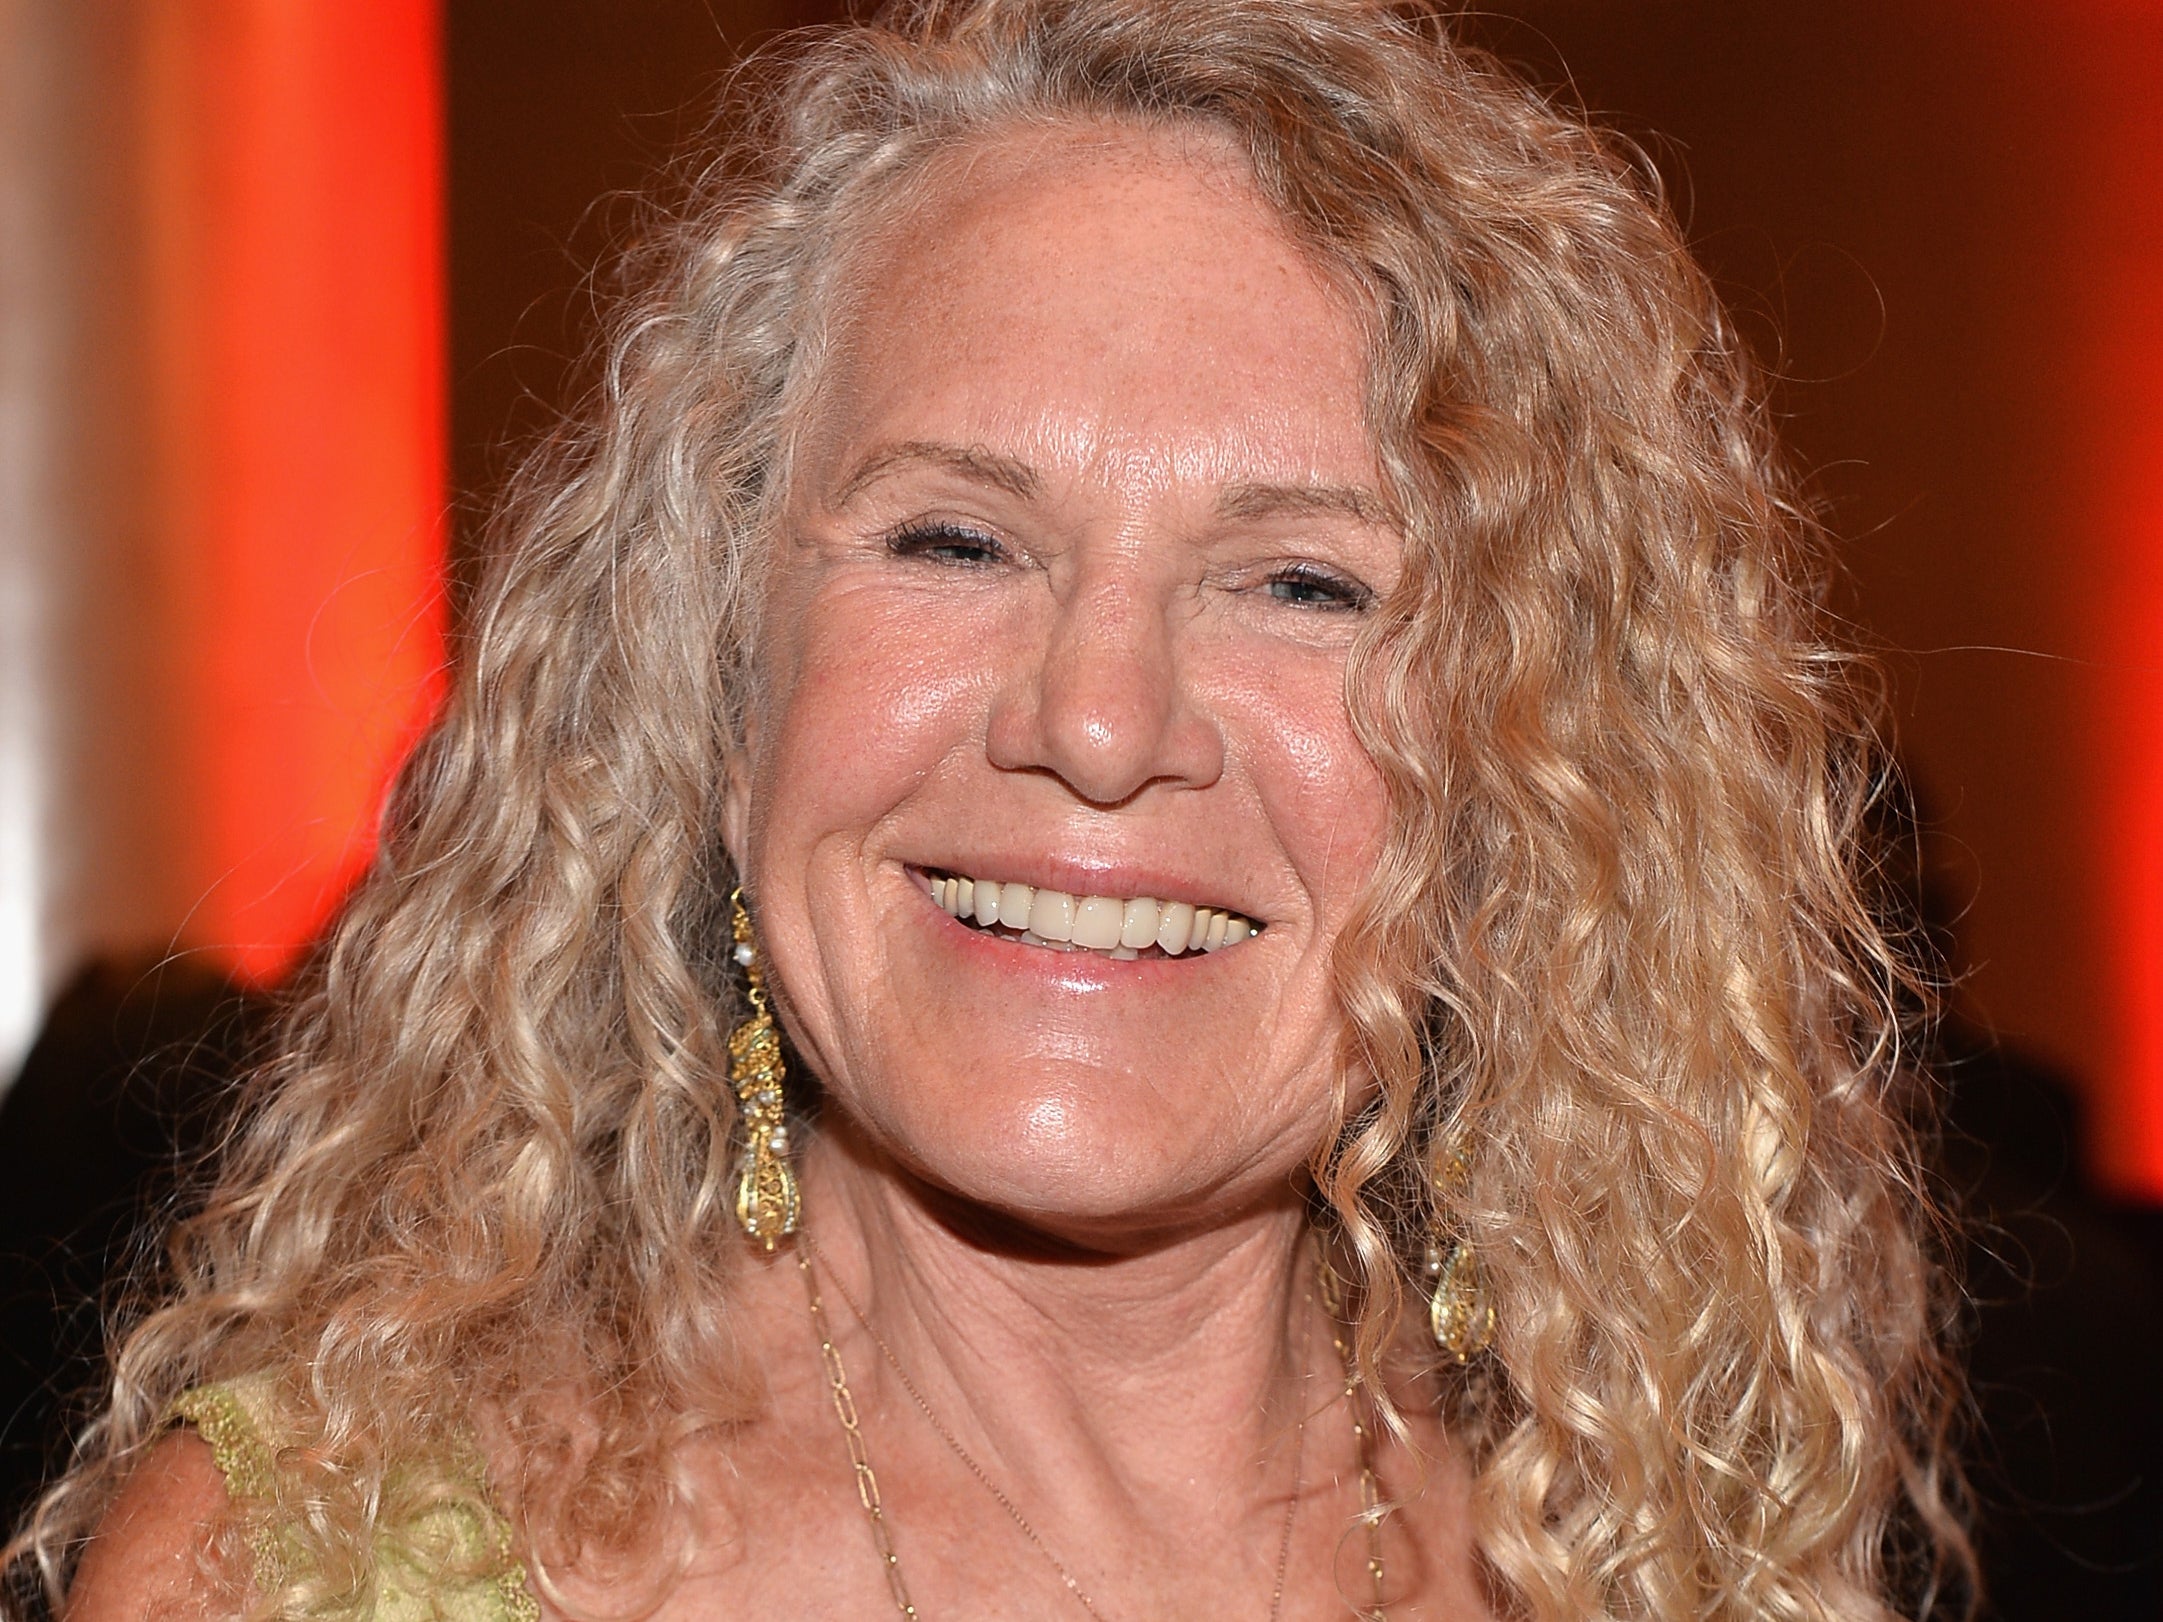 Wal-Mart heiress Christy Walton is the world's richest woman